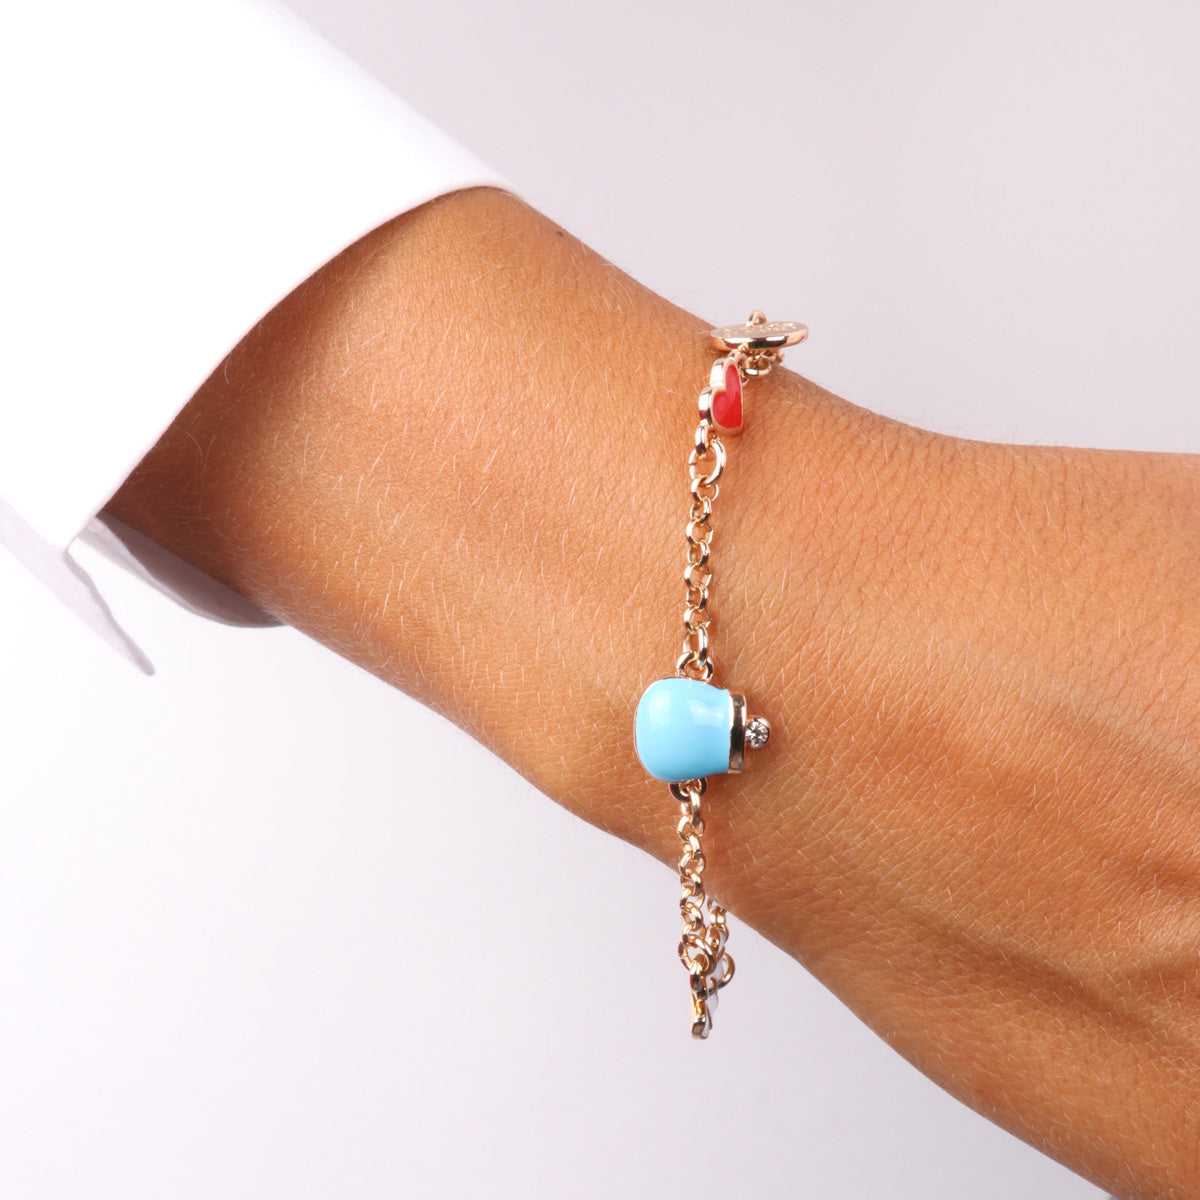 Metal bracelet with pendants embellished with colored enamels in the shape of a charming bell, heart and flower